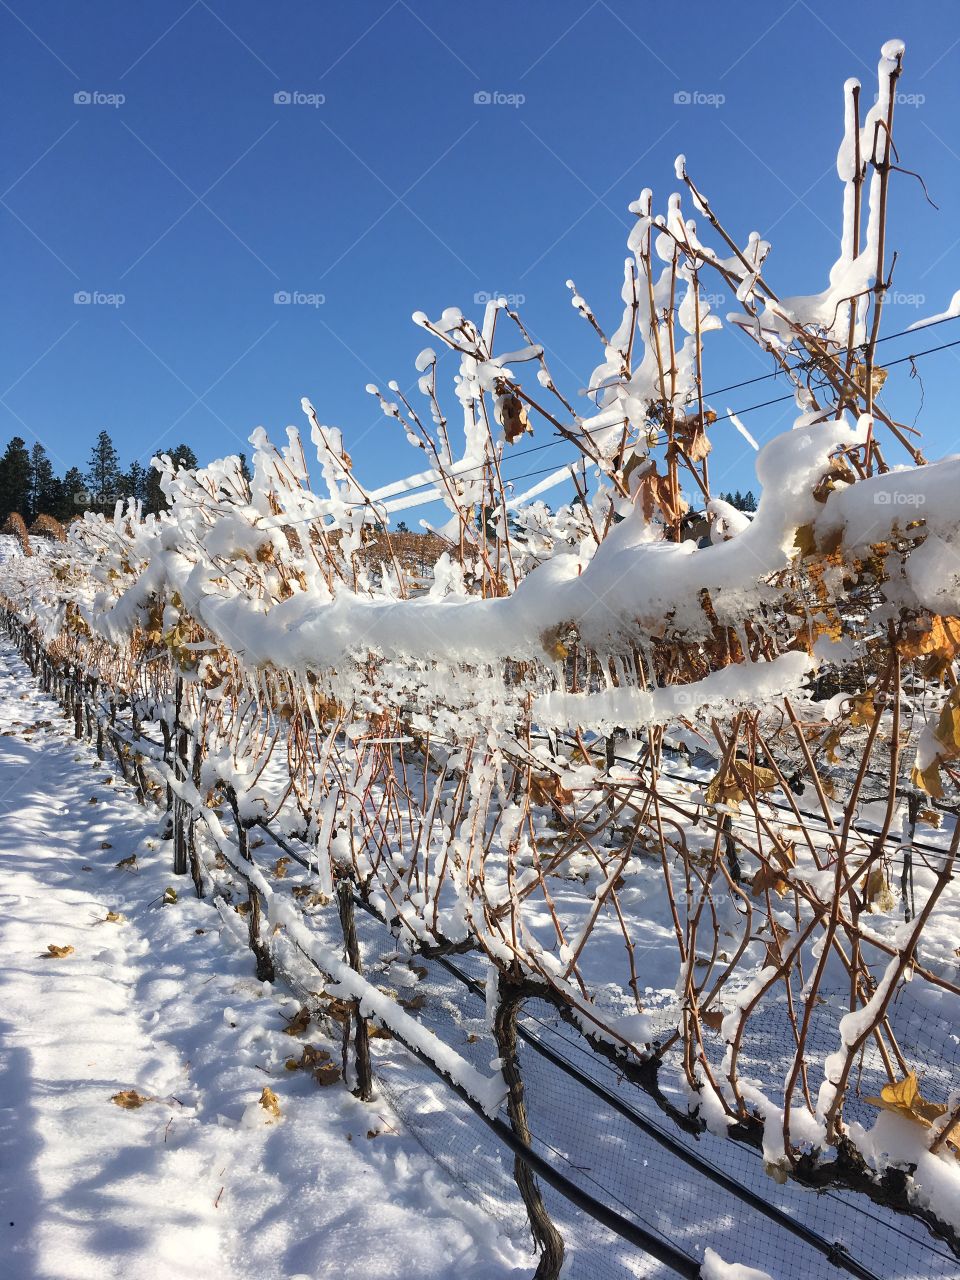 Vines in the winter